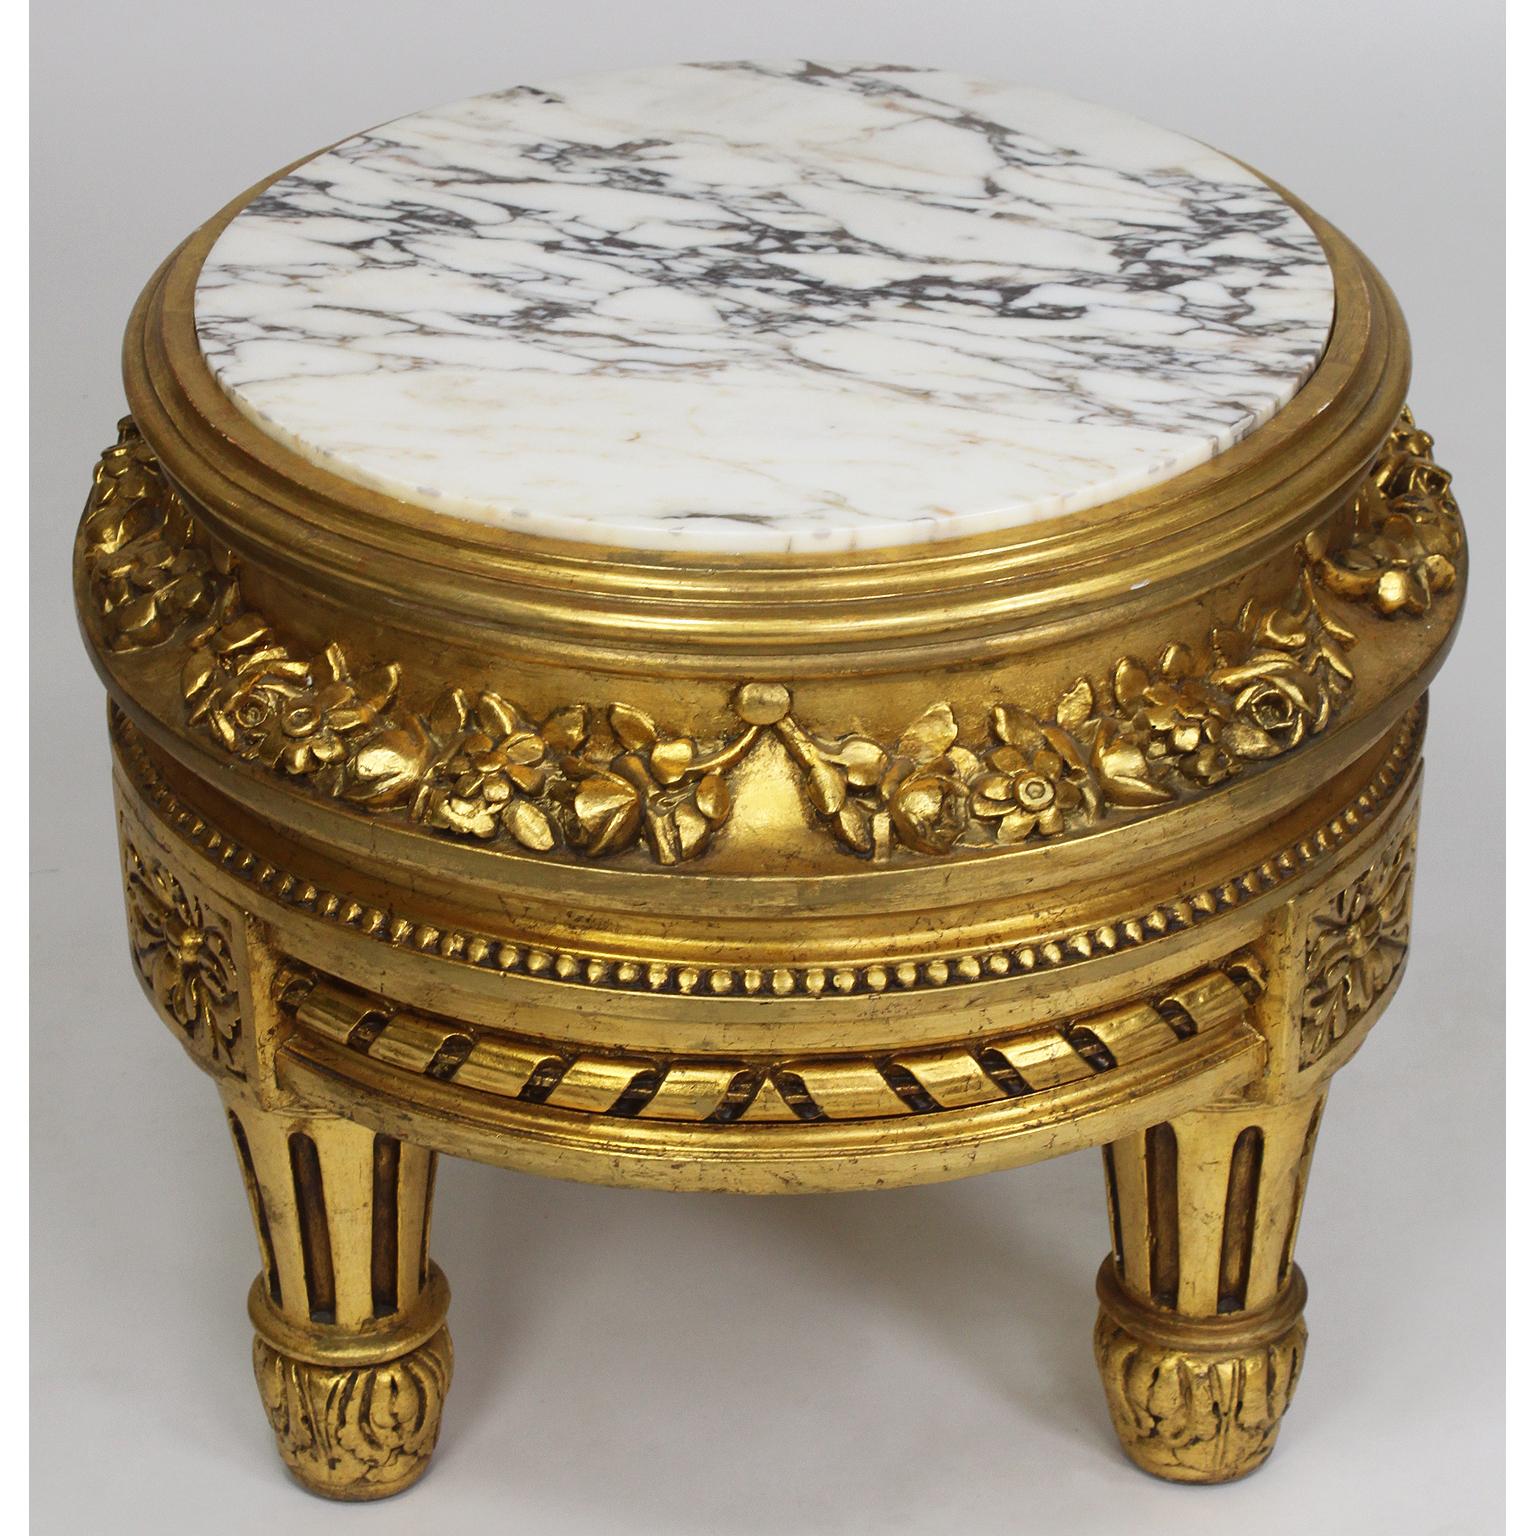 A French belle époque Louis XVI style giltwood carved pedestal stand with marble top. The circular pedestal with carvings of flowers and fitted with a veined white marble top, raised on three low fluted legs, Paris, circa 1920.

Measures: Height